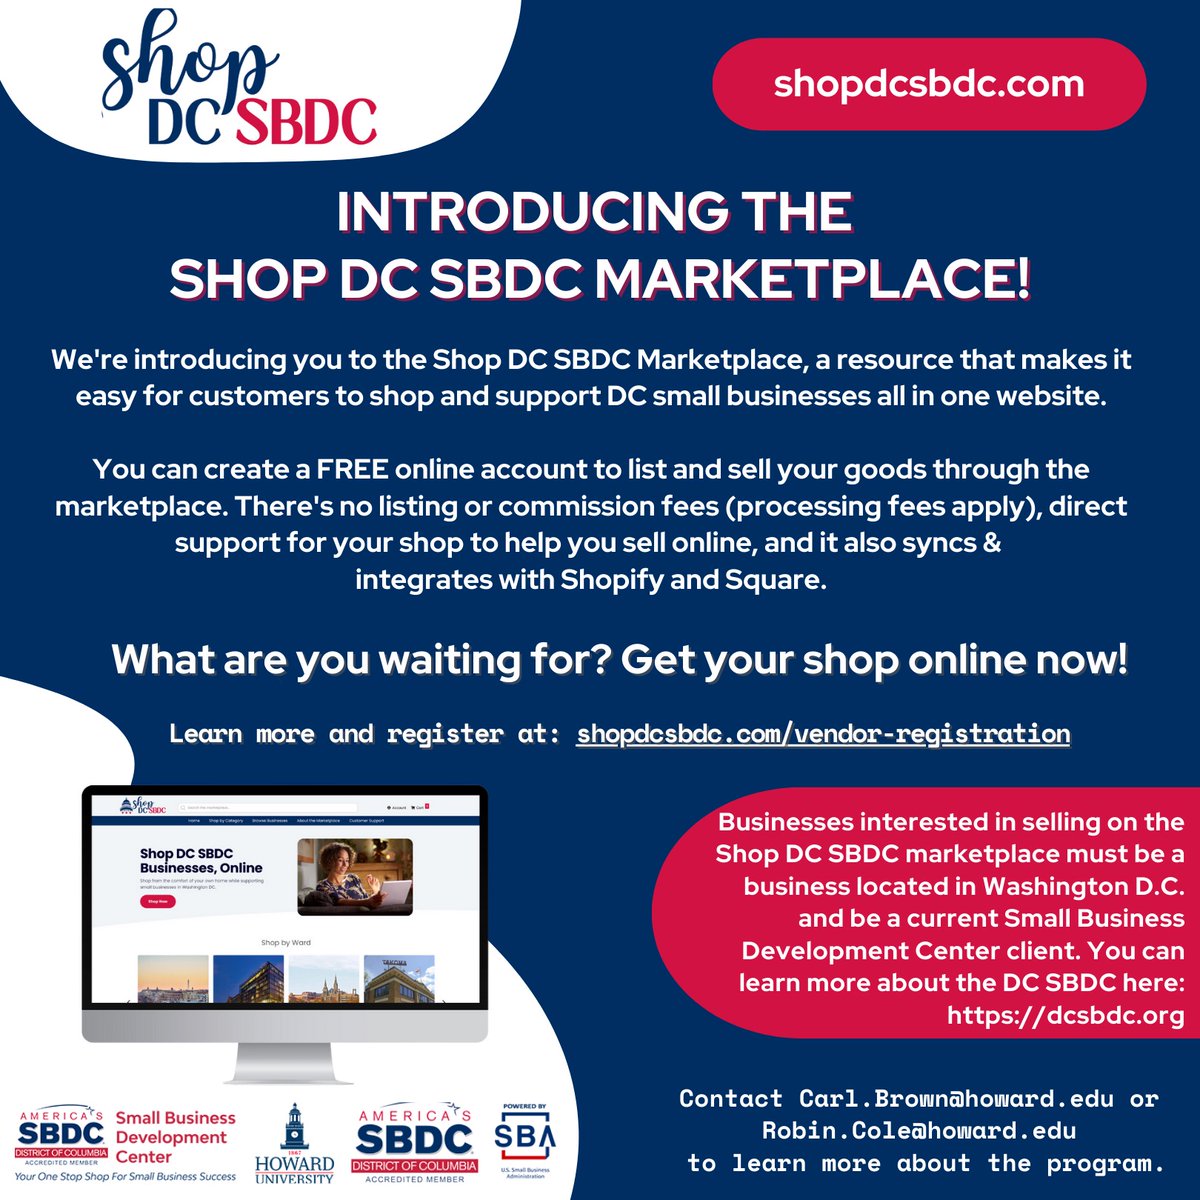 @DCSBDC MarketPlace! Get your shop online #TODAY! To learn more or to register visit shopdcbdc.com. #ShopDCSBDC #Marketplace